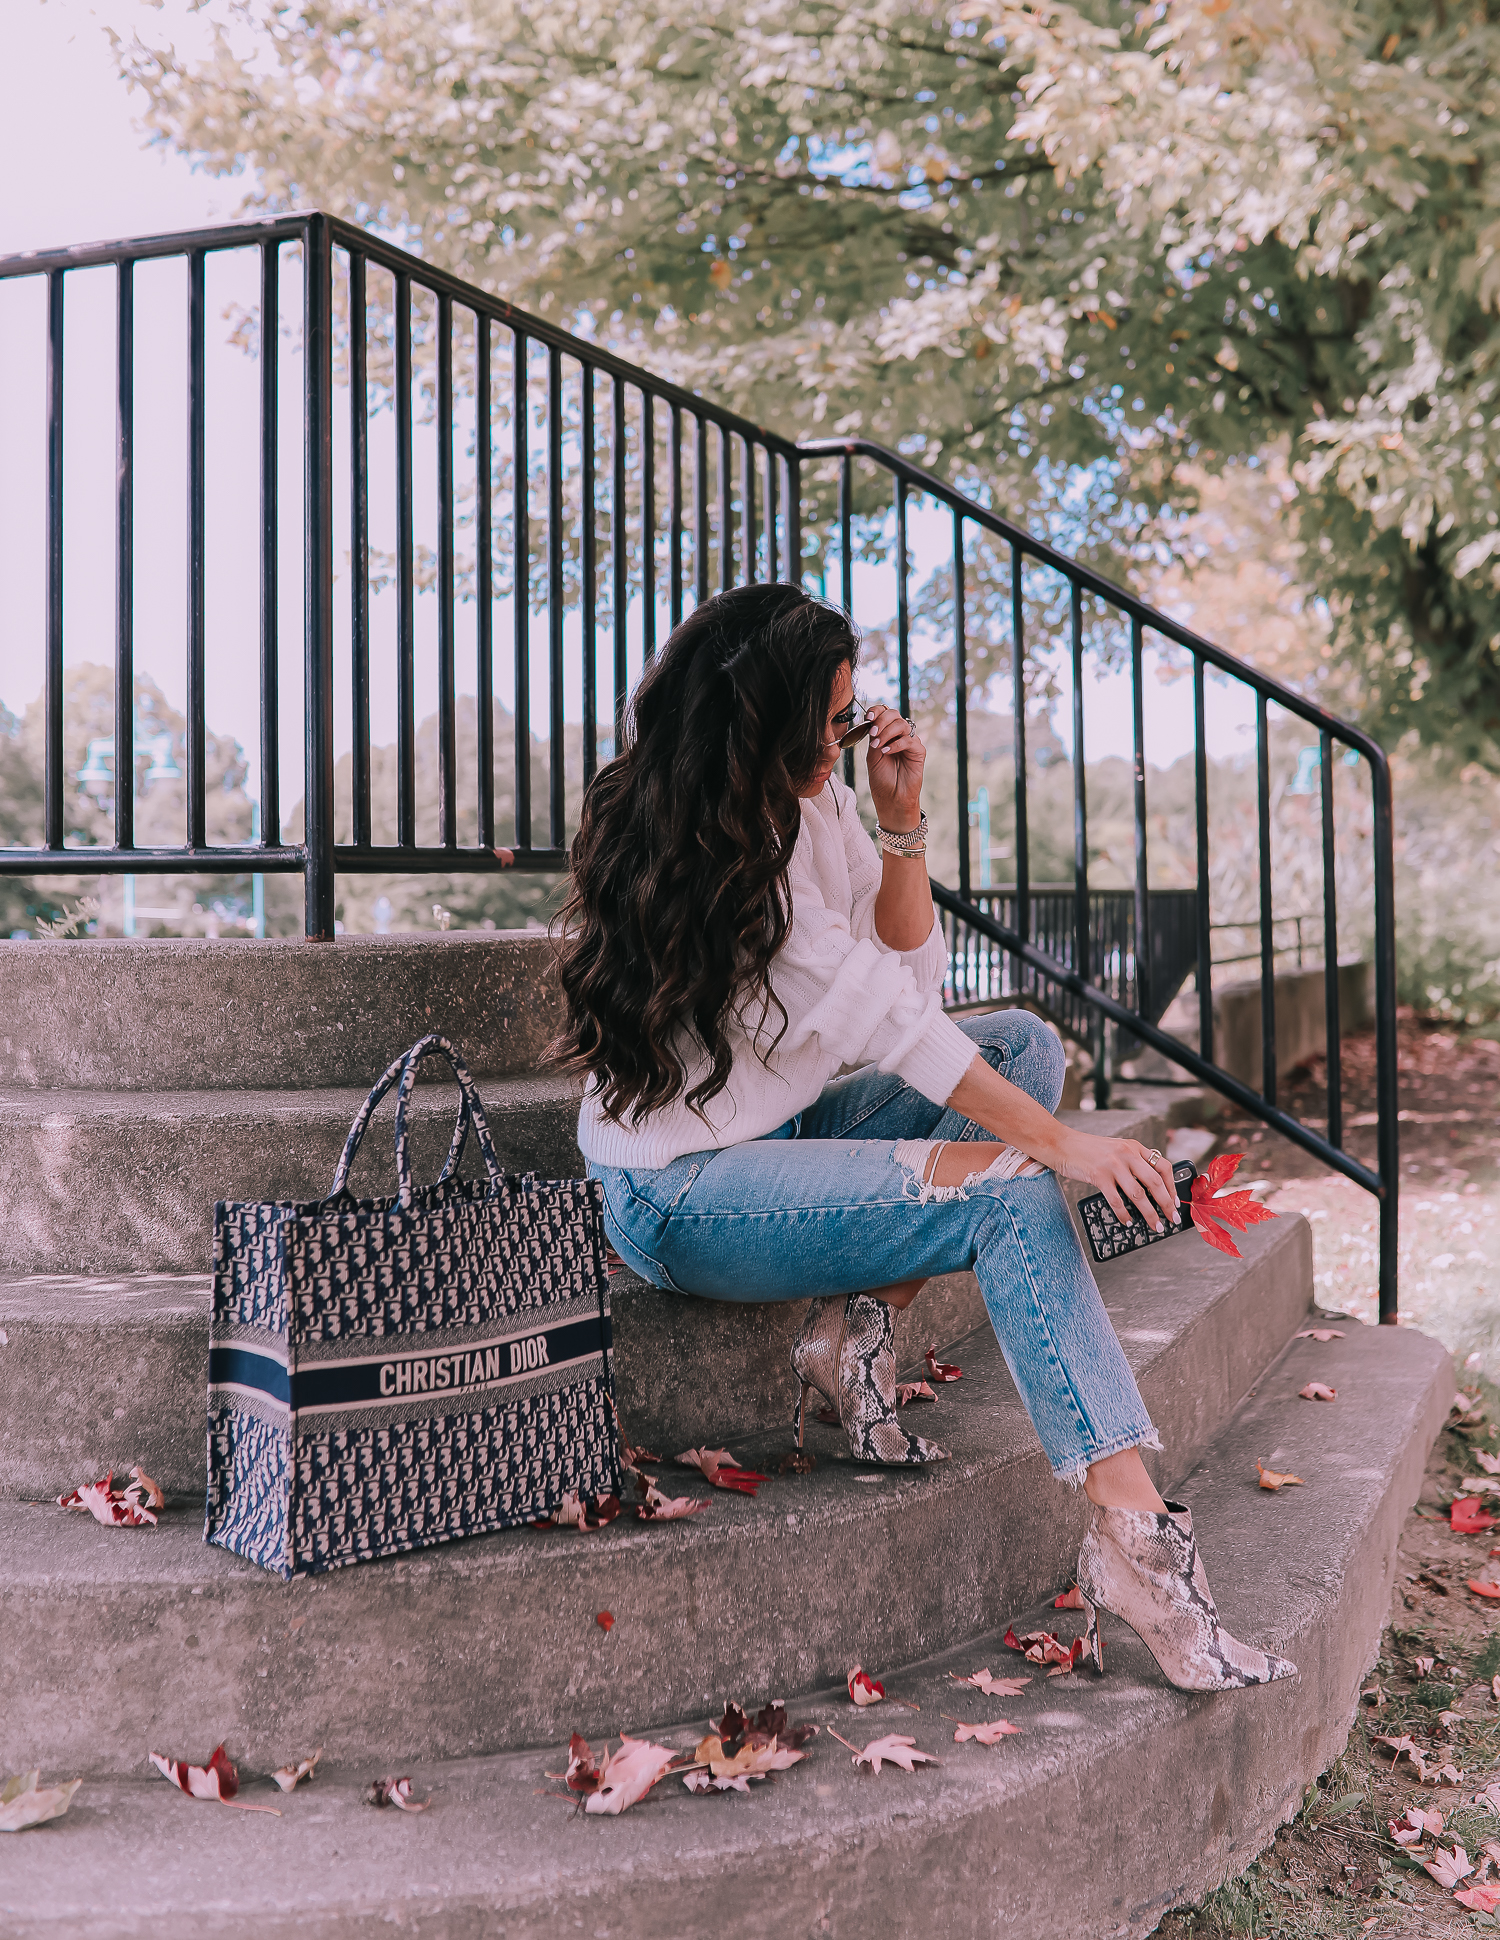 fall fashion outfits pinterest 2019, abercrombie mom jeans, Christian Dior book tote oblique navy, emily ann gemma, jessica simpson snake booties-2